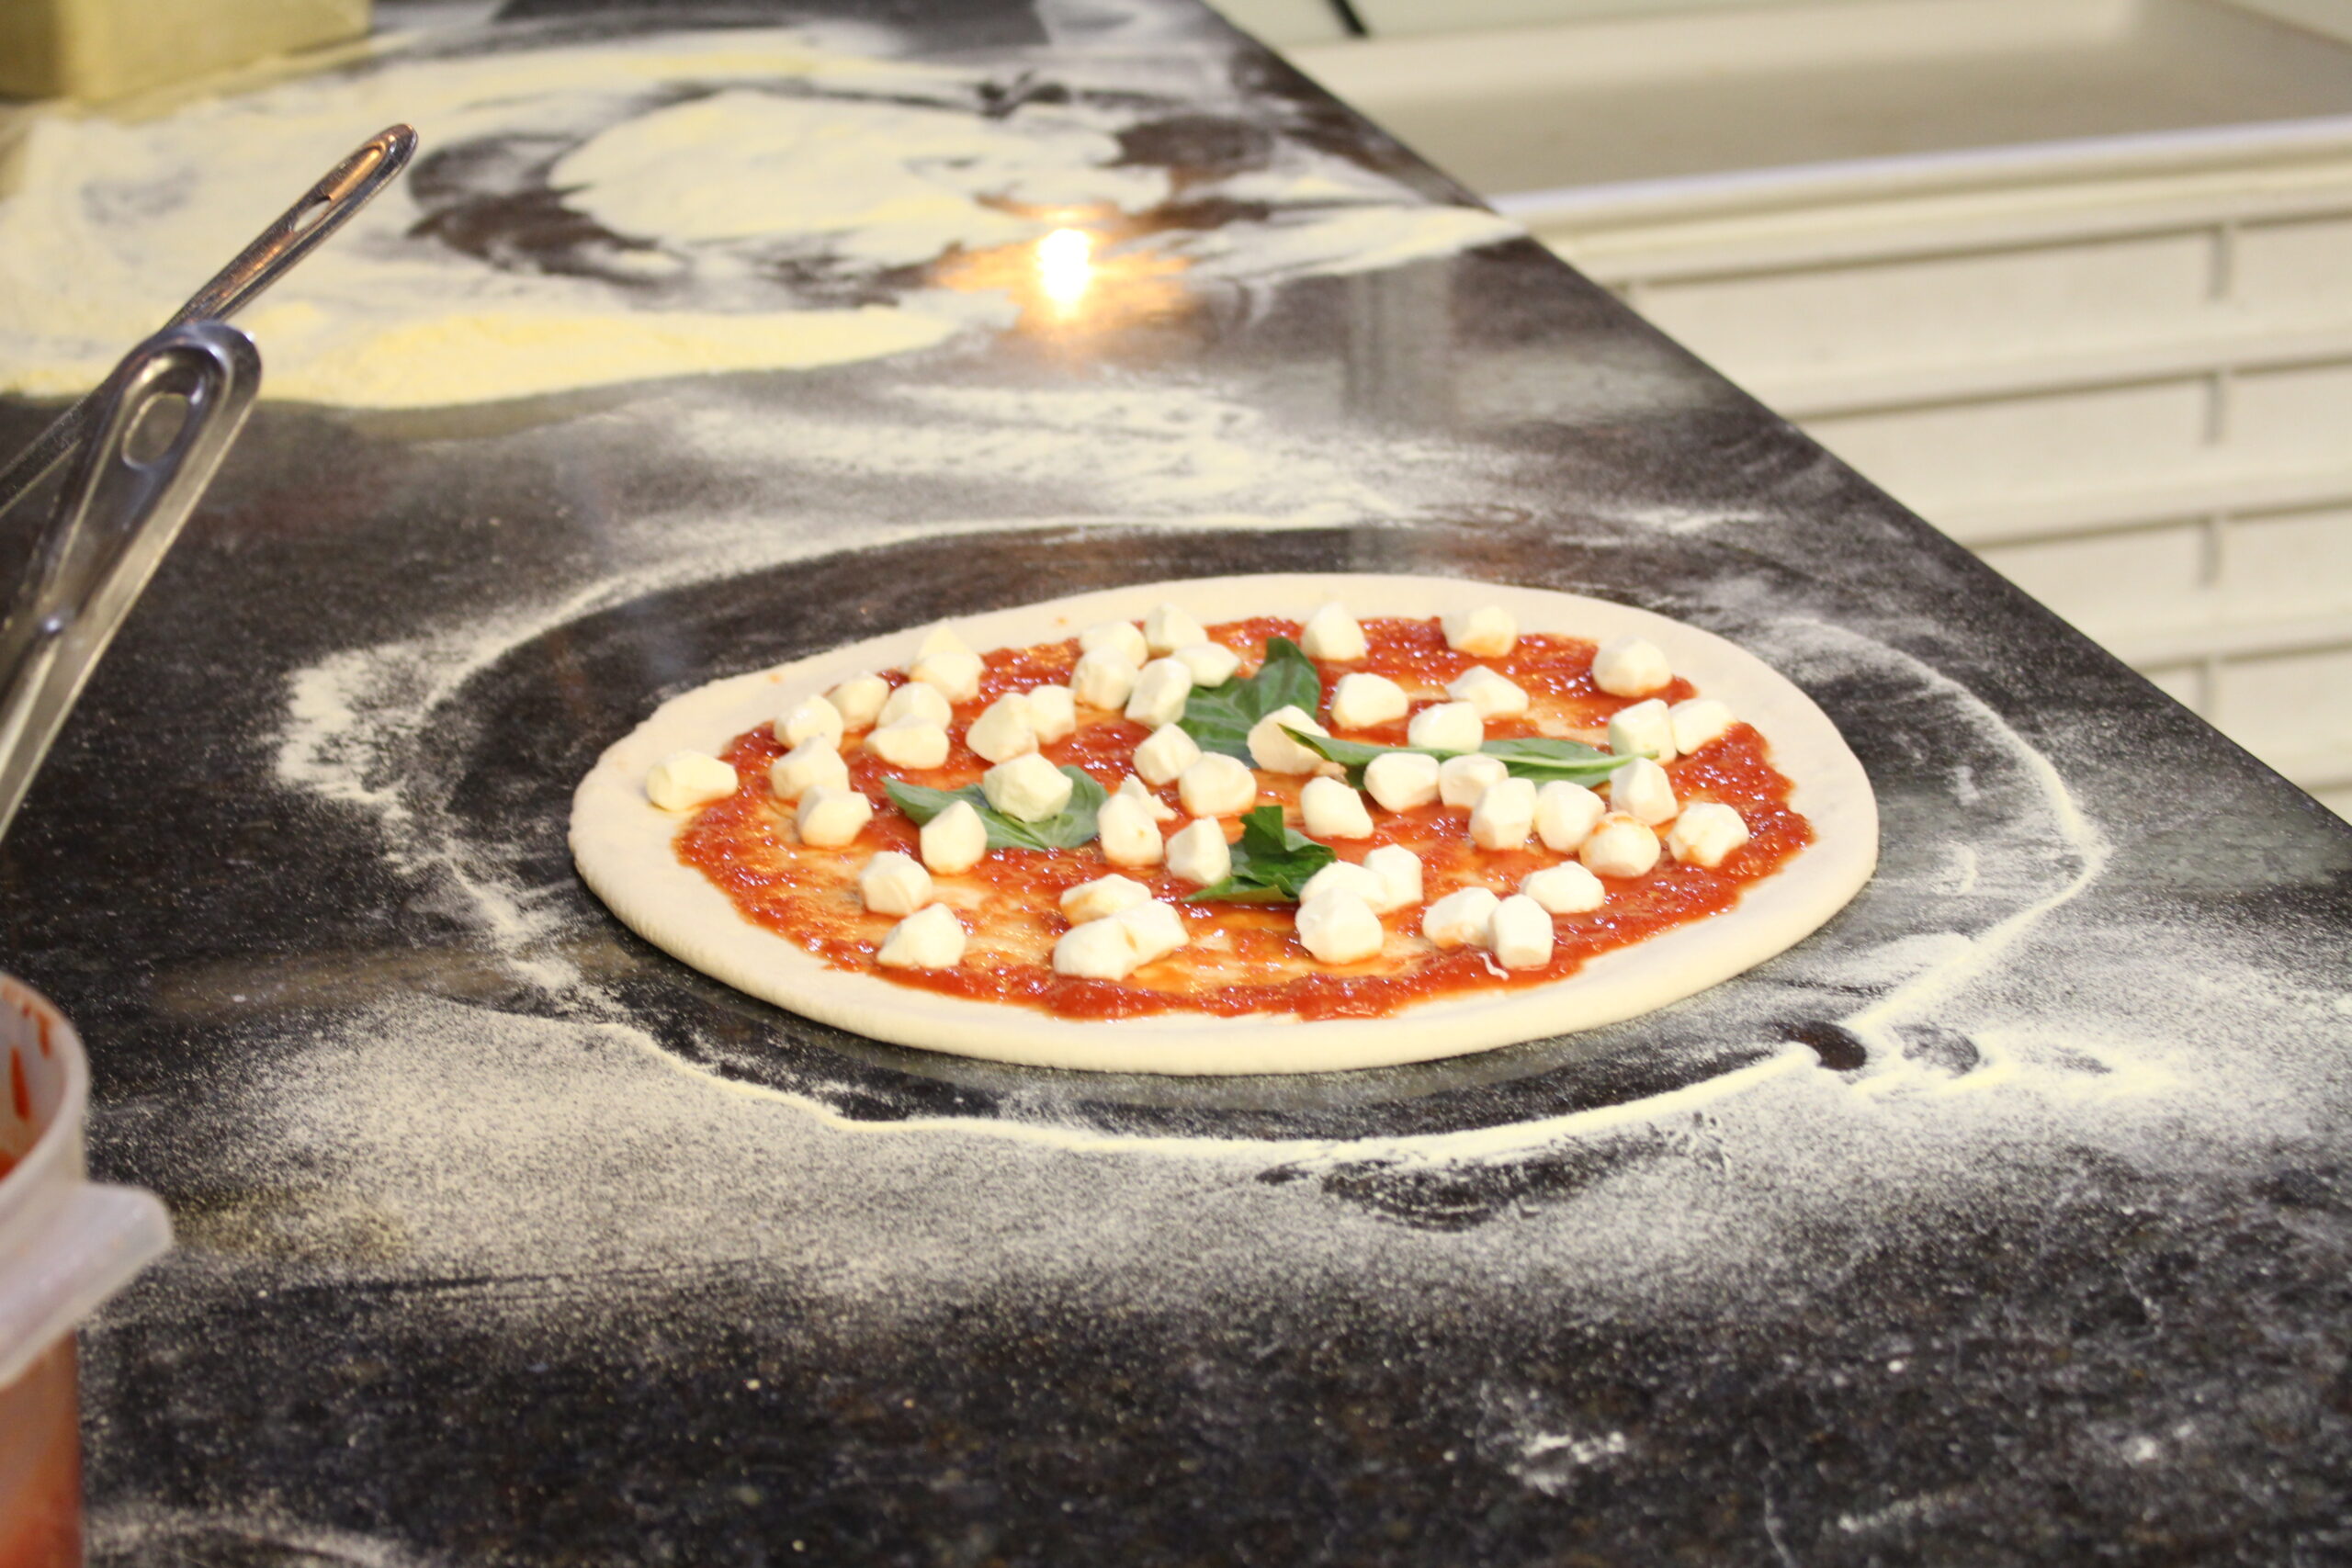 A Margherita pizza ready to be put in the oven